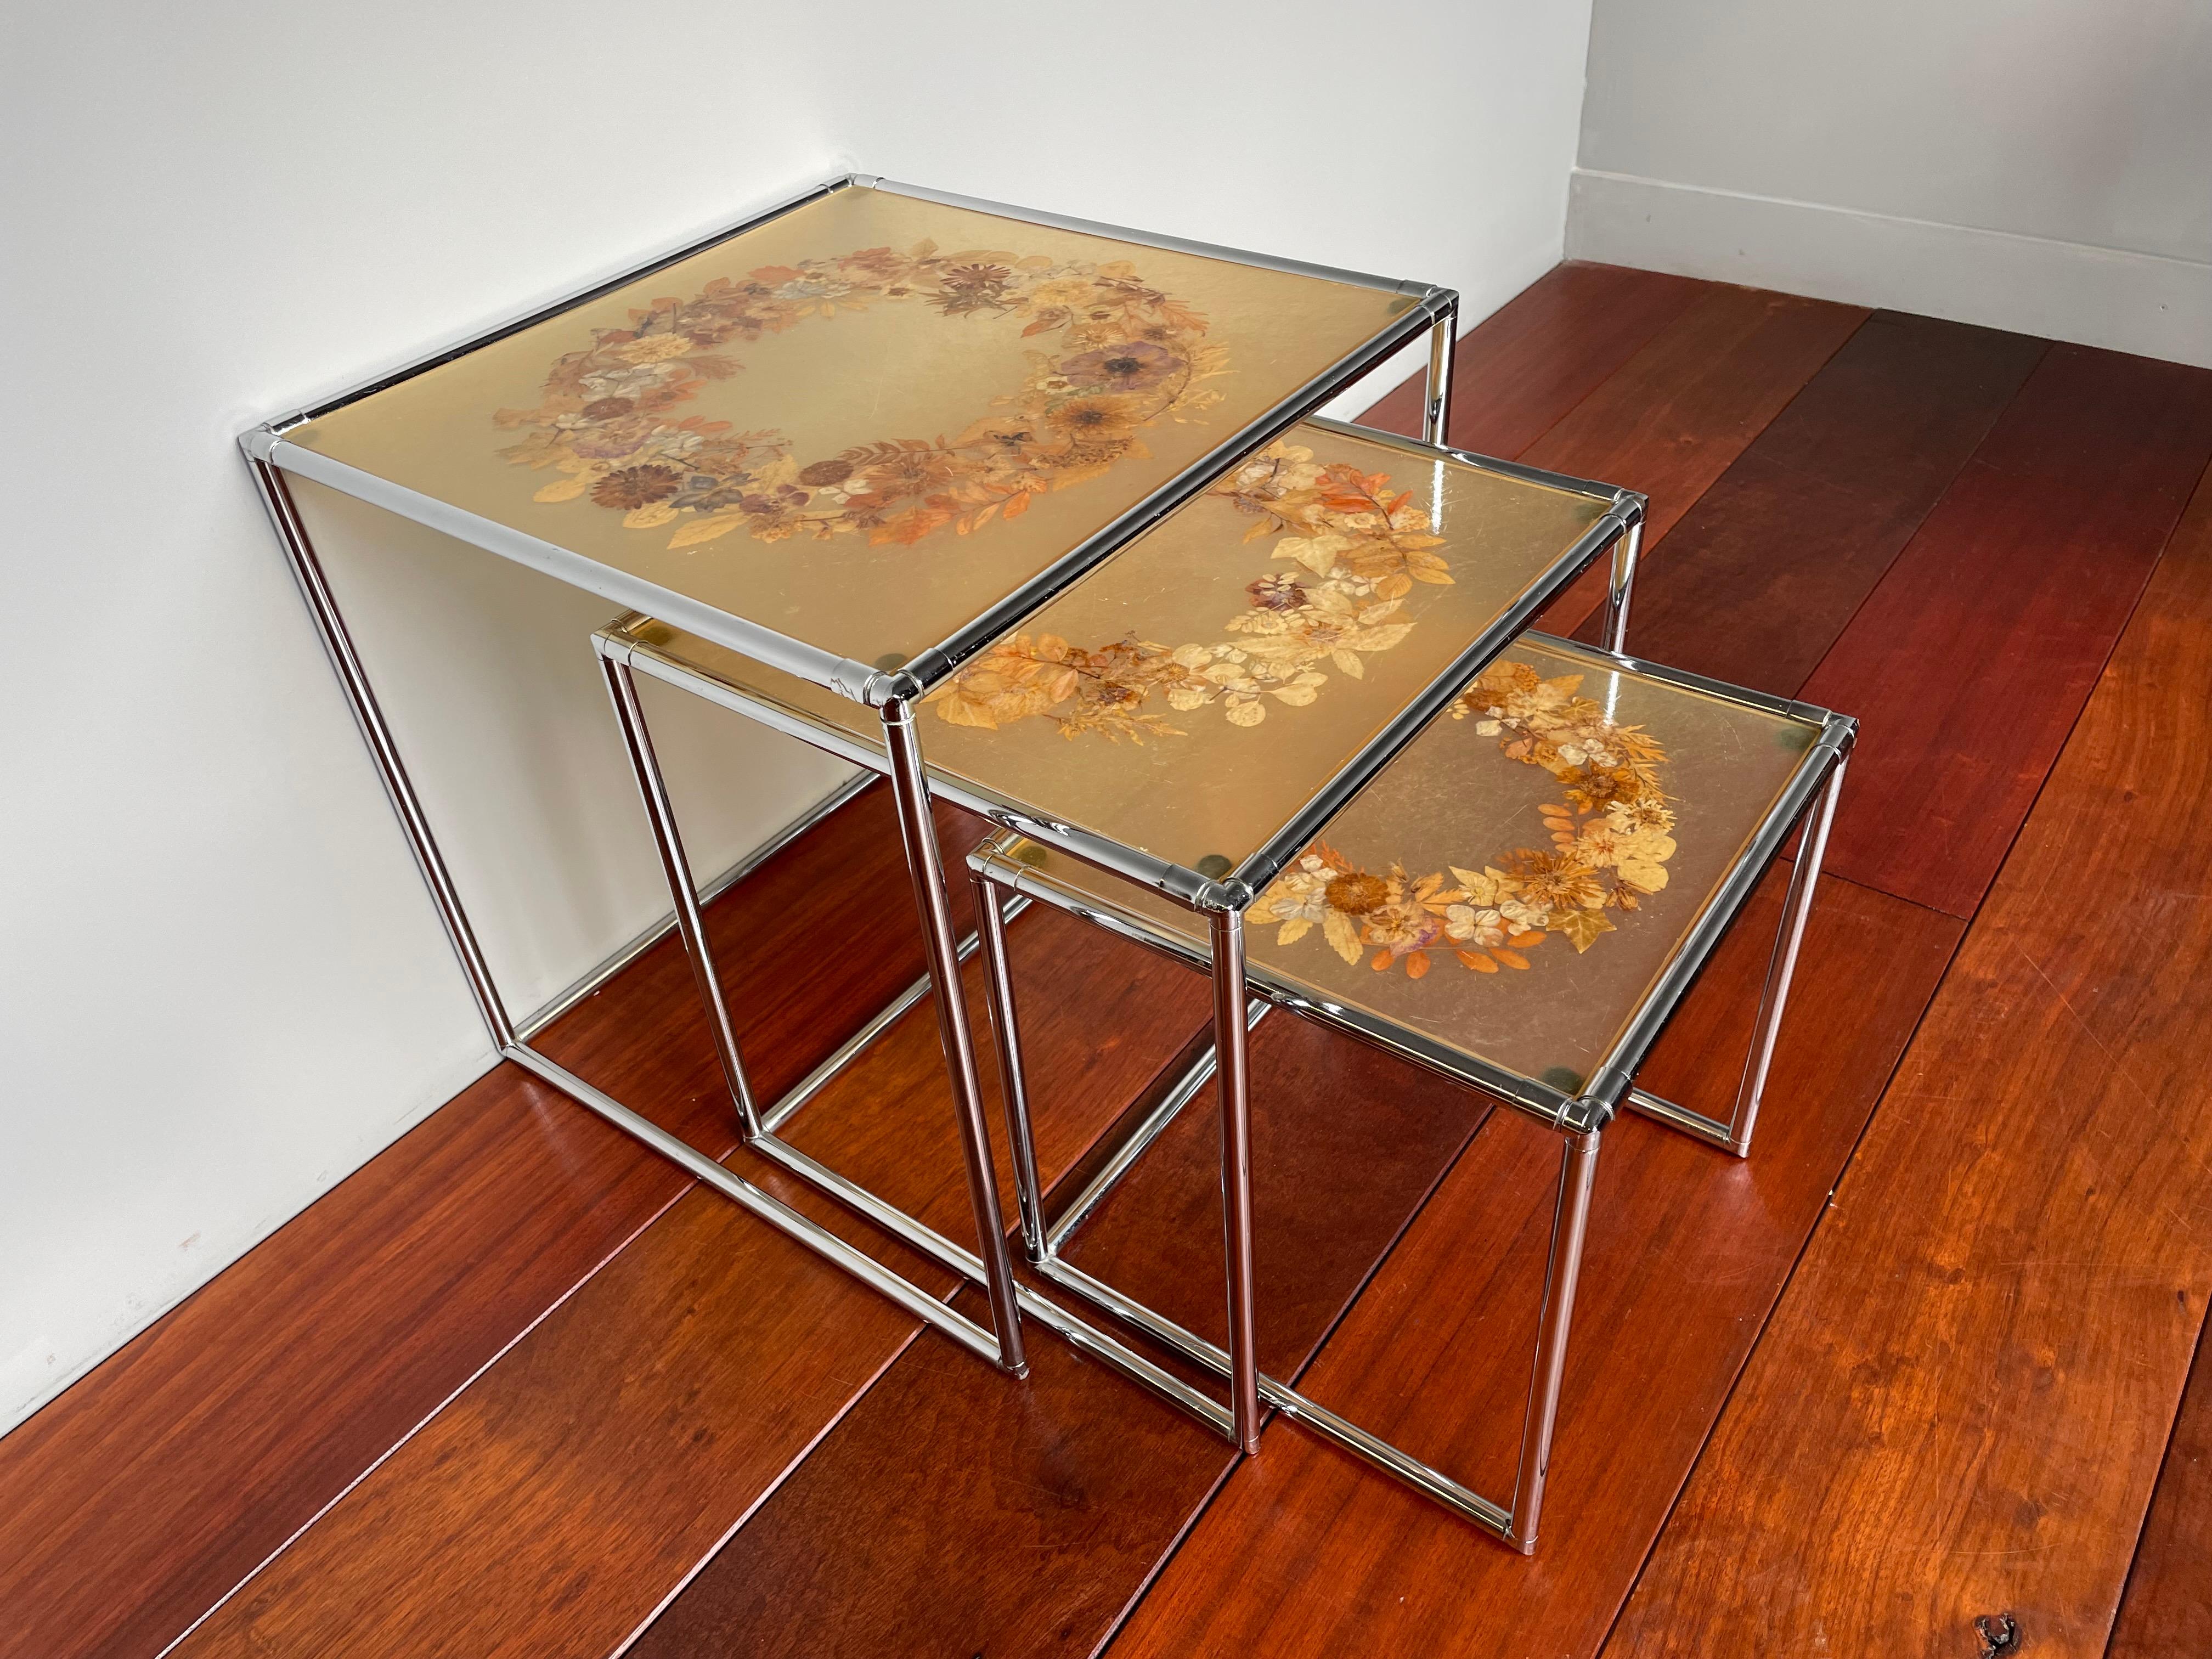 Beautiful design and great colors nest of tables with resin tops with real flowers and leafs inclusions.

These striking nesting tables with removable tops are all handcrafted with a unique technique of real flowers and leaf inclusions. We have